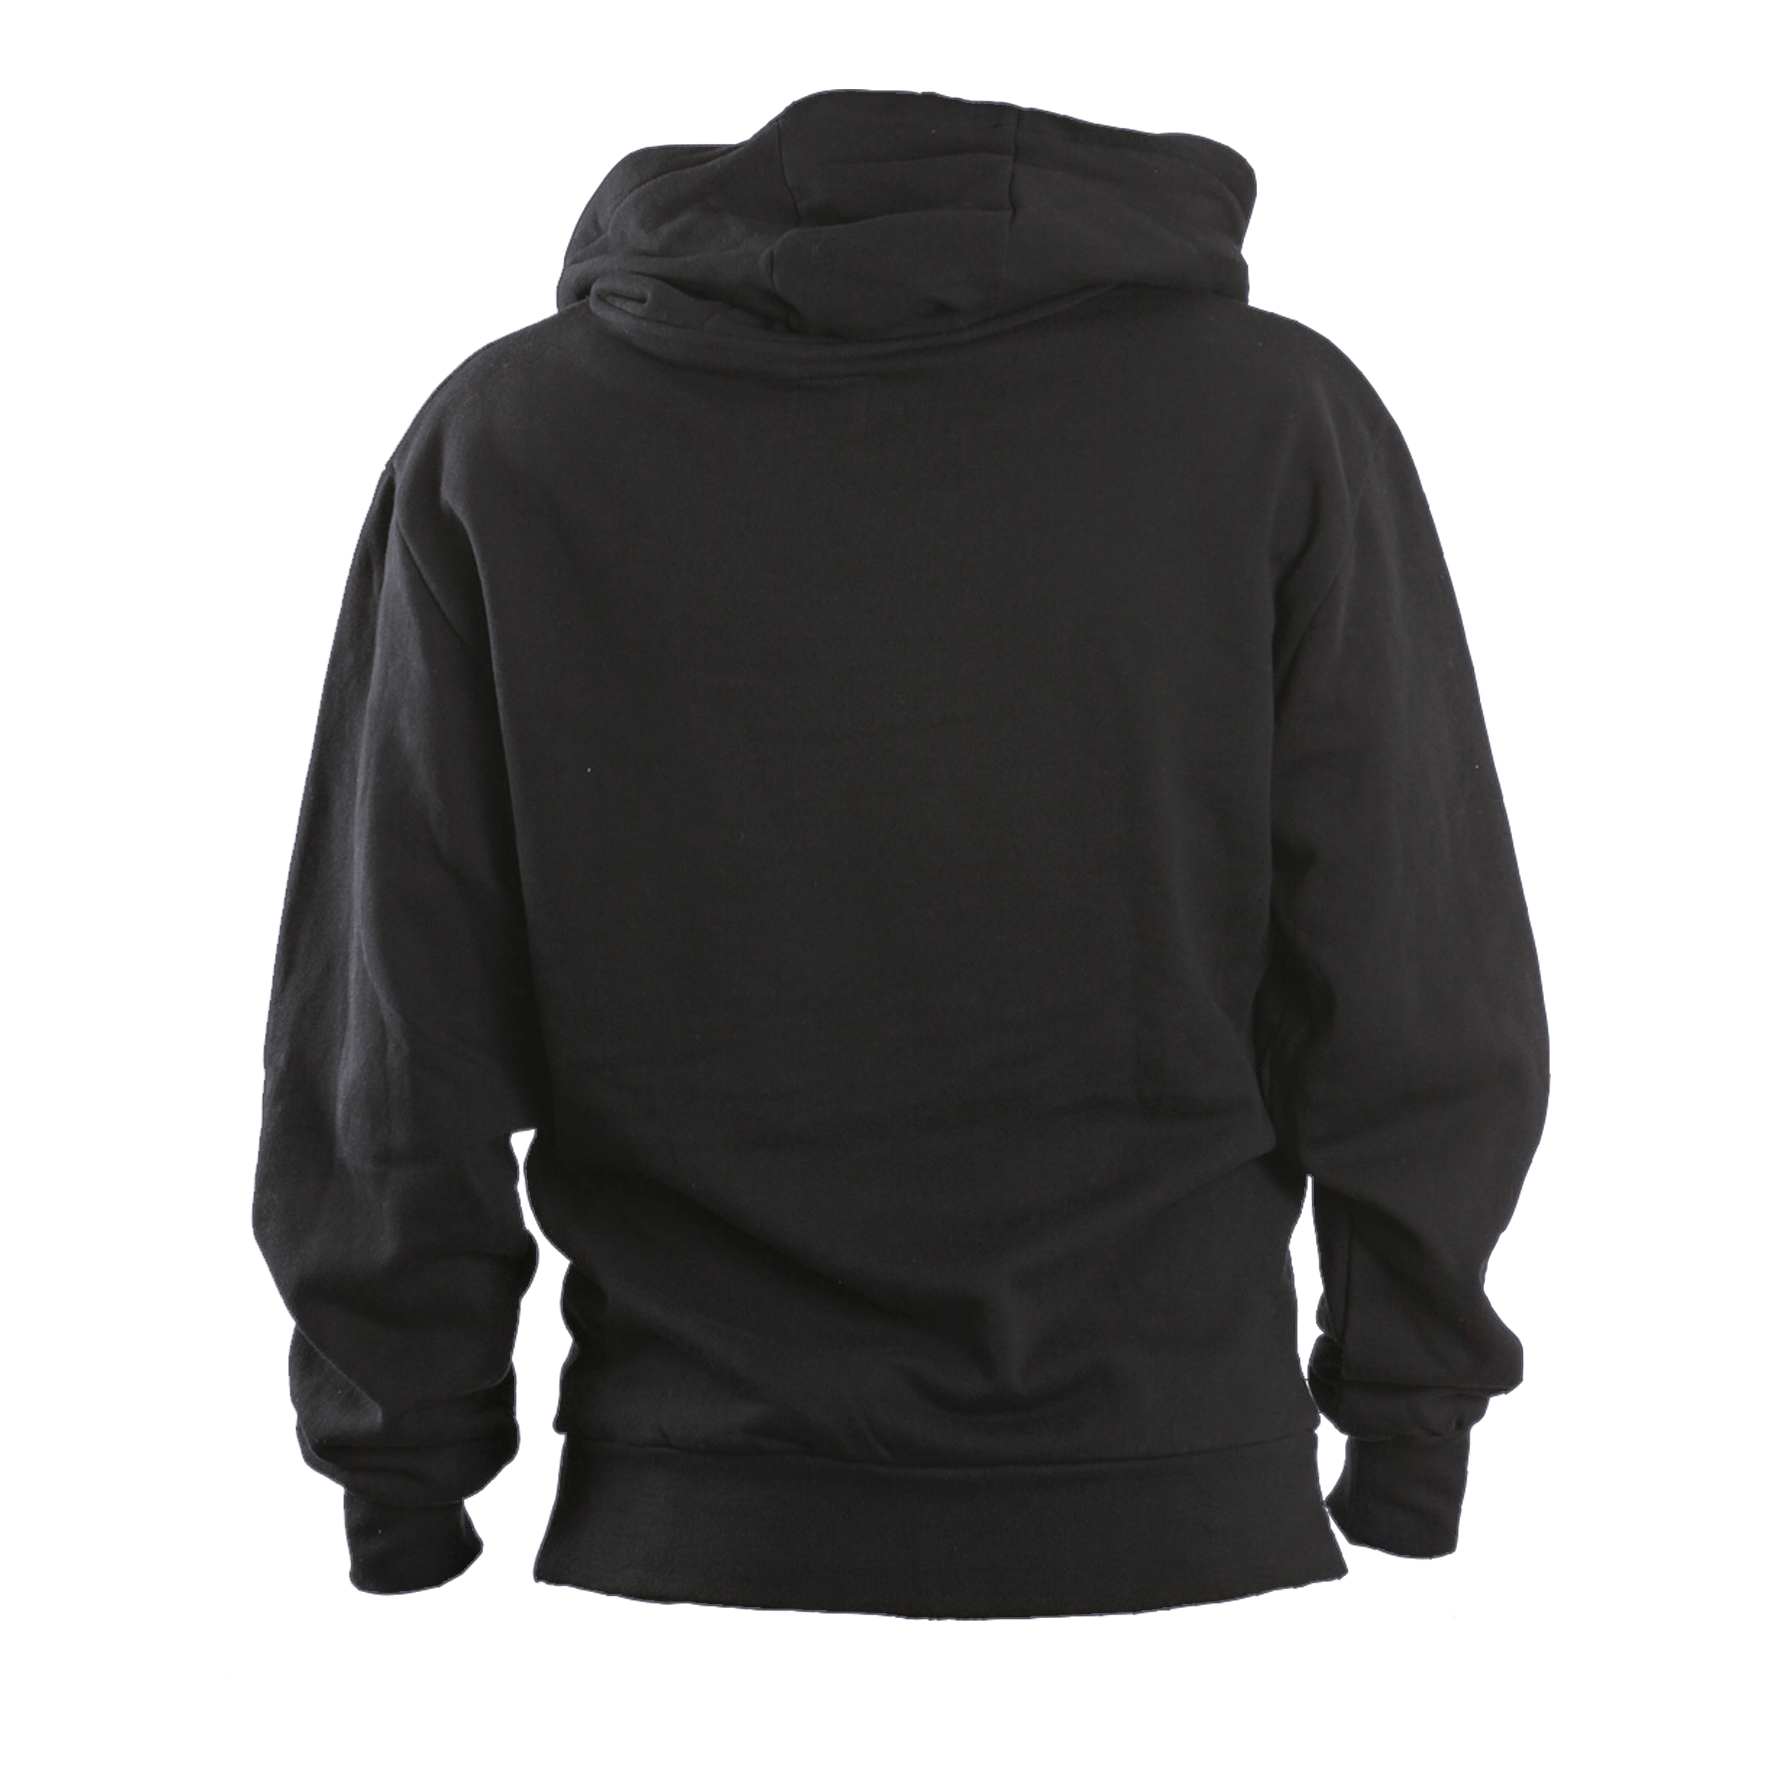 Black Hoodie Pullover PNG HD Quality